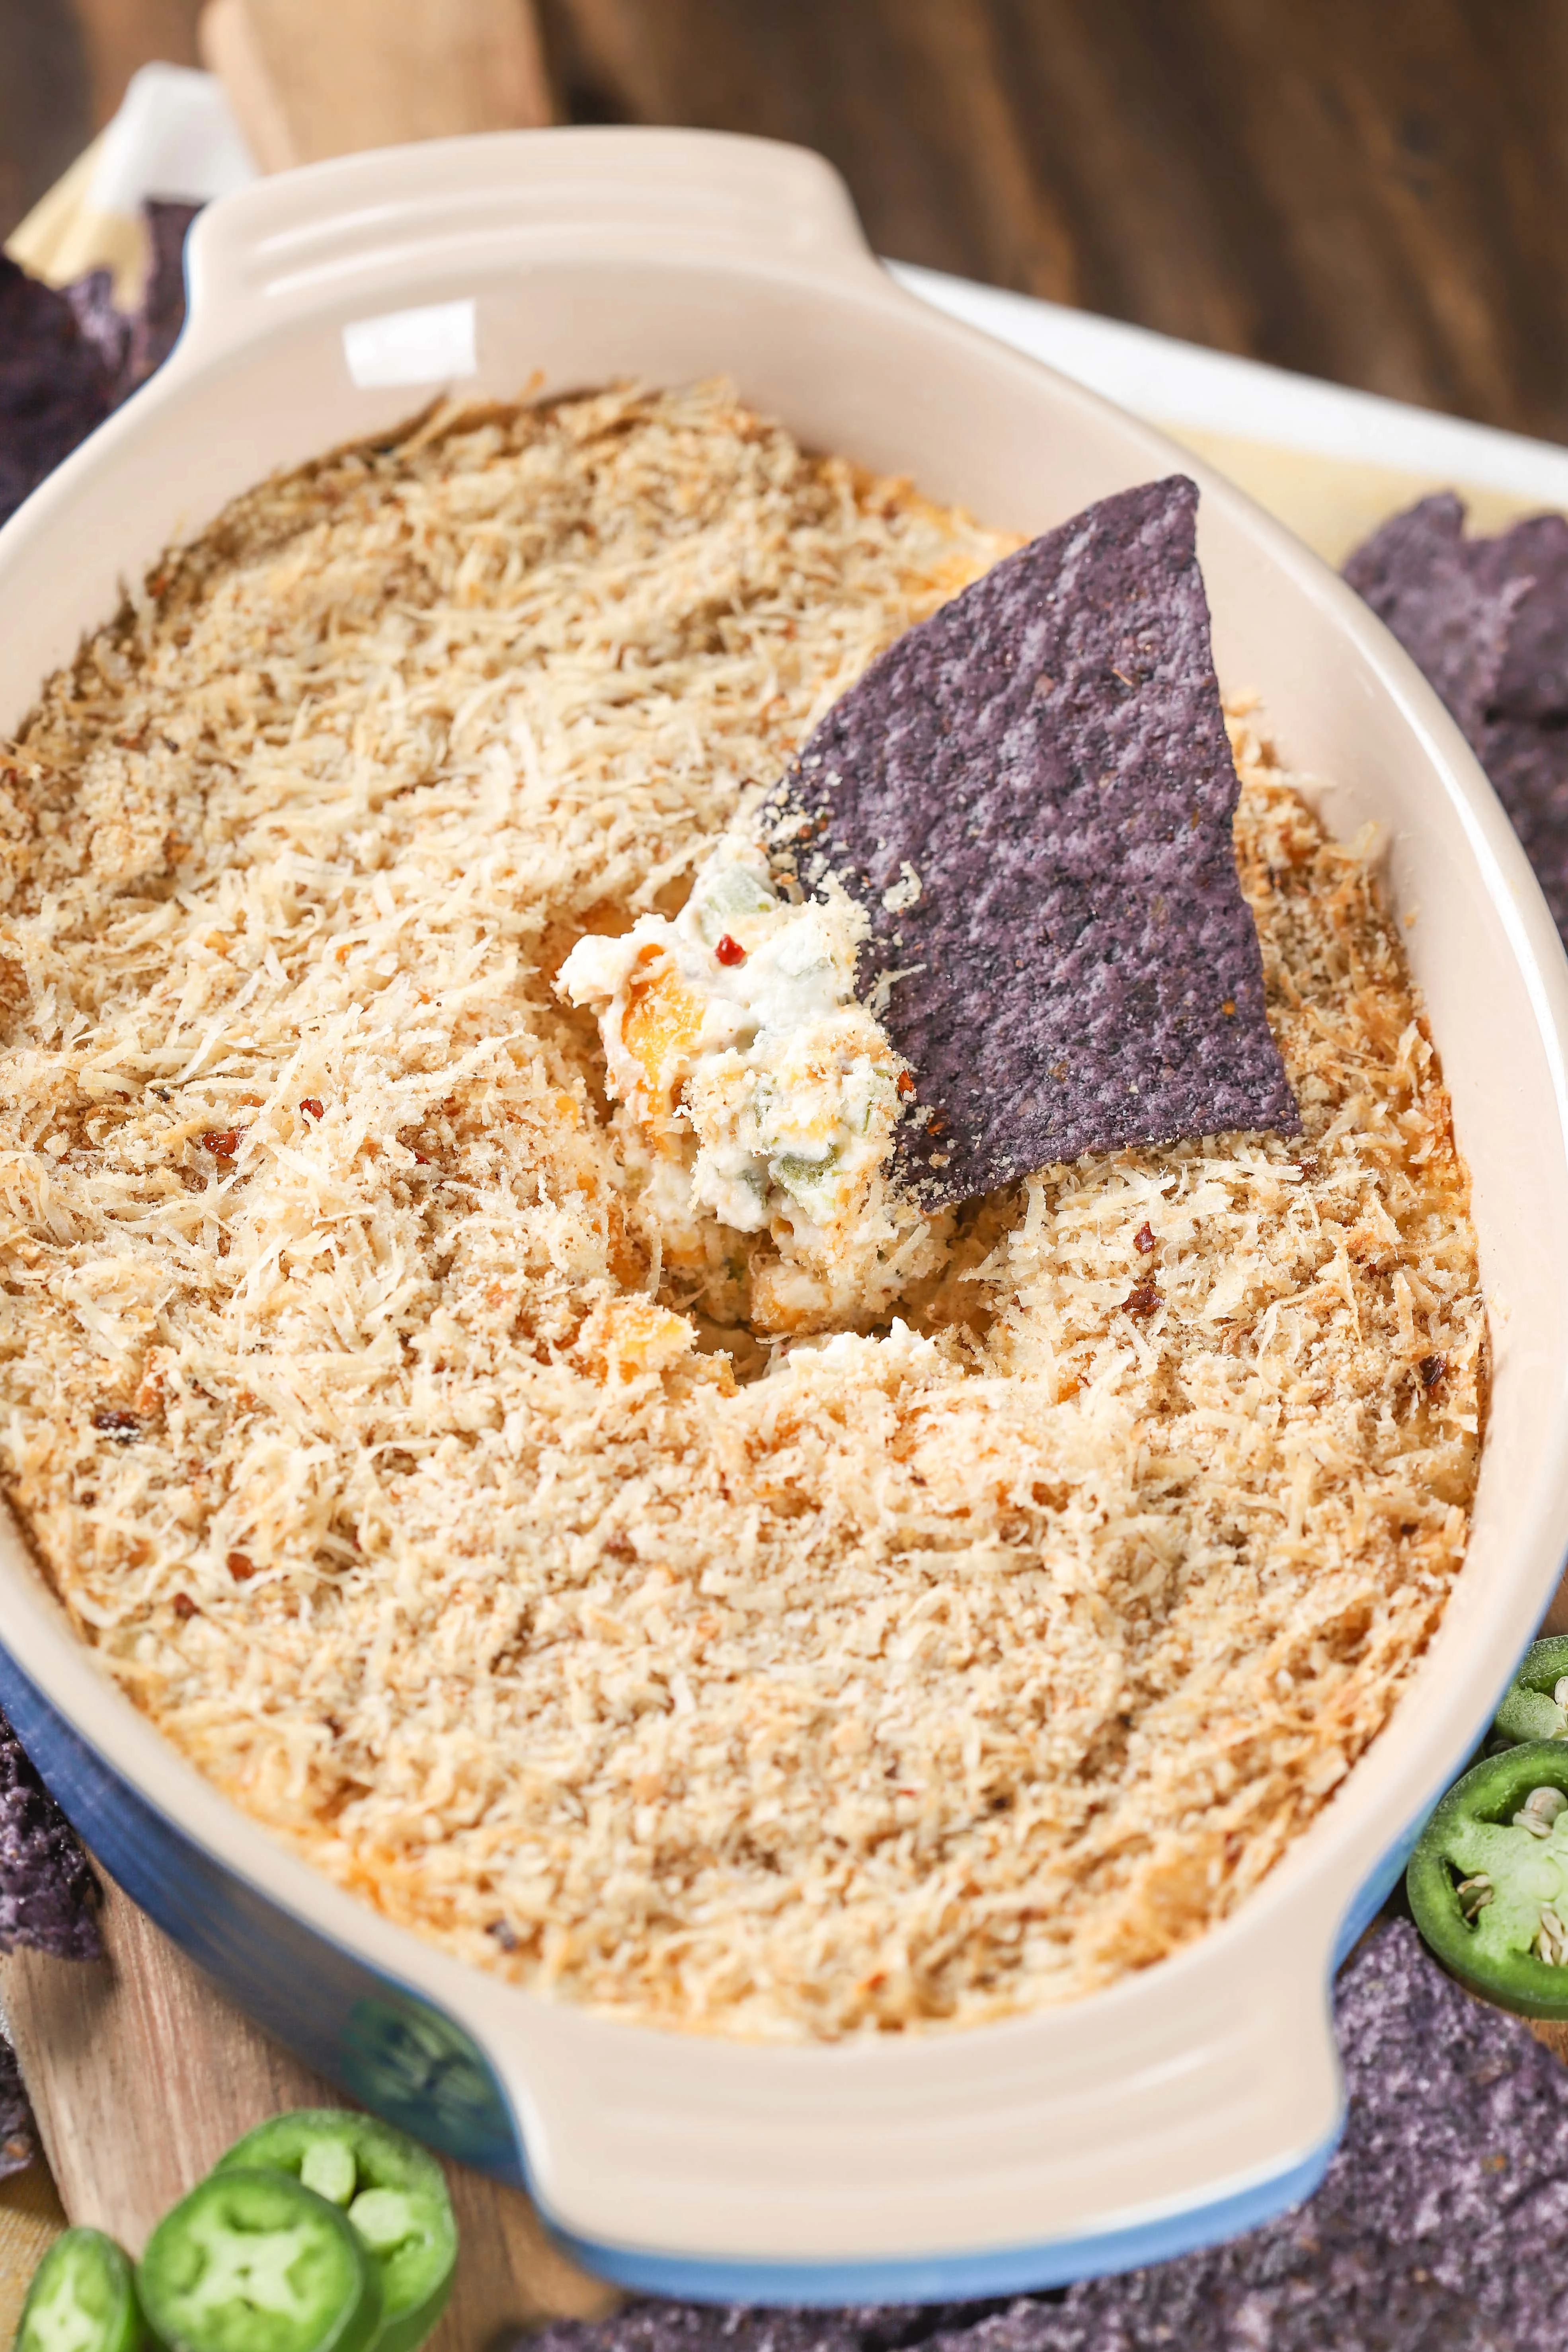 Jalapeno Popper Dip made in the oven or microwave